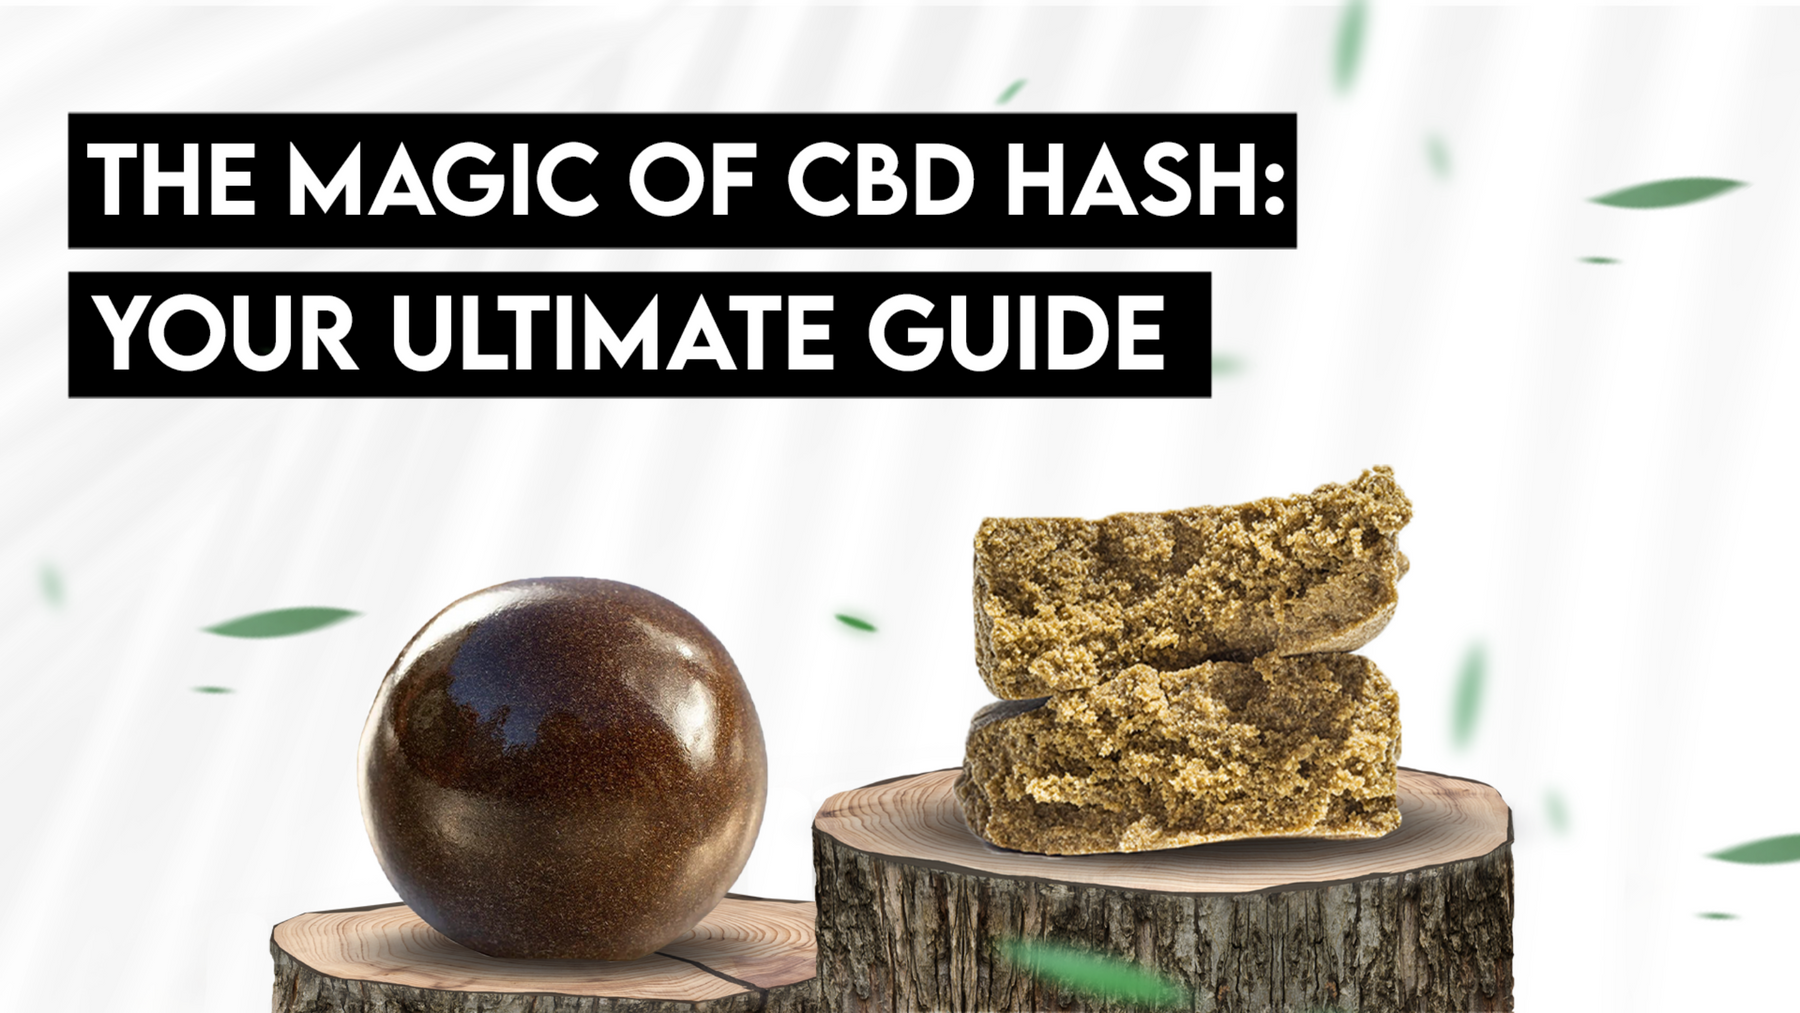 The Magic of CBD Hash: Your Ultimate Guide